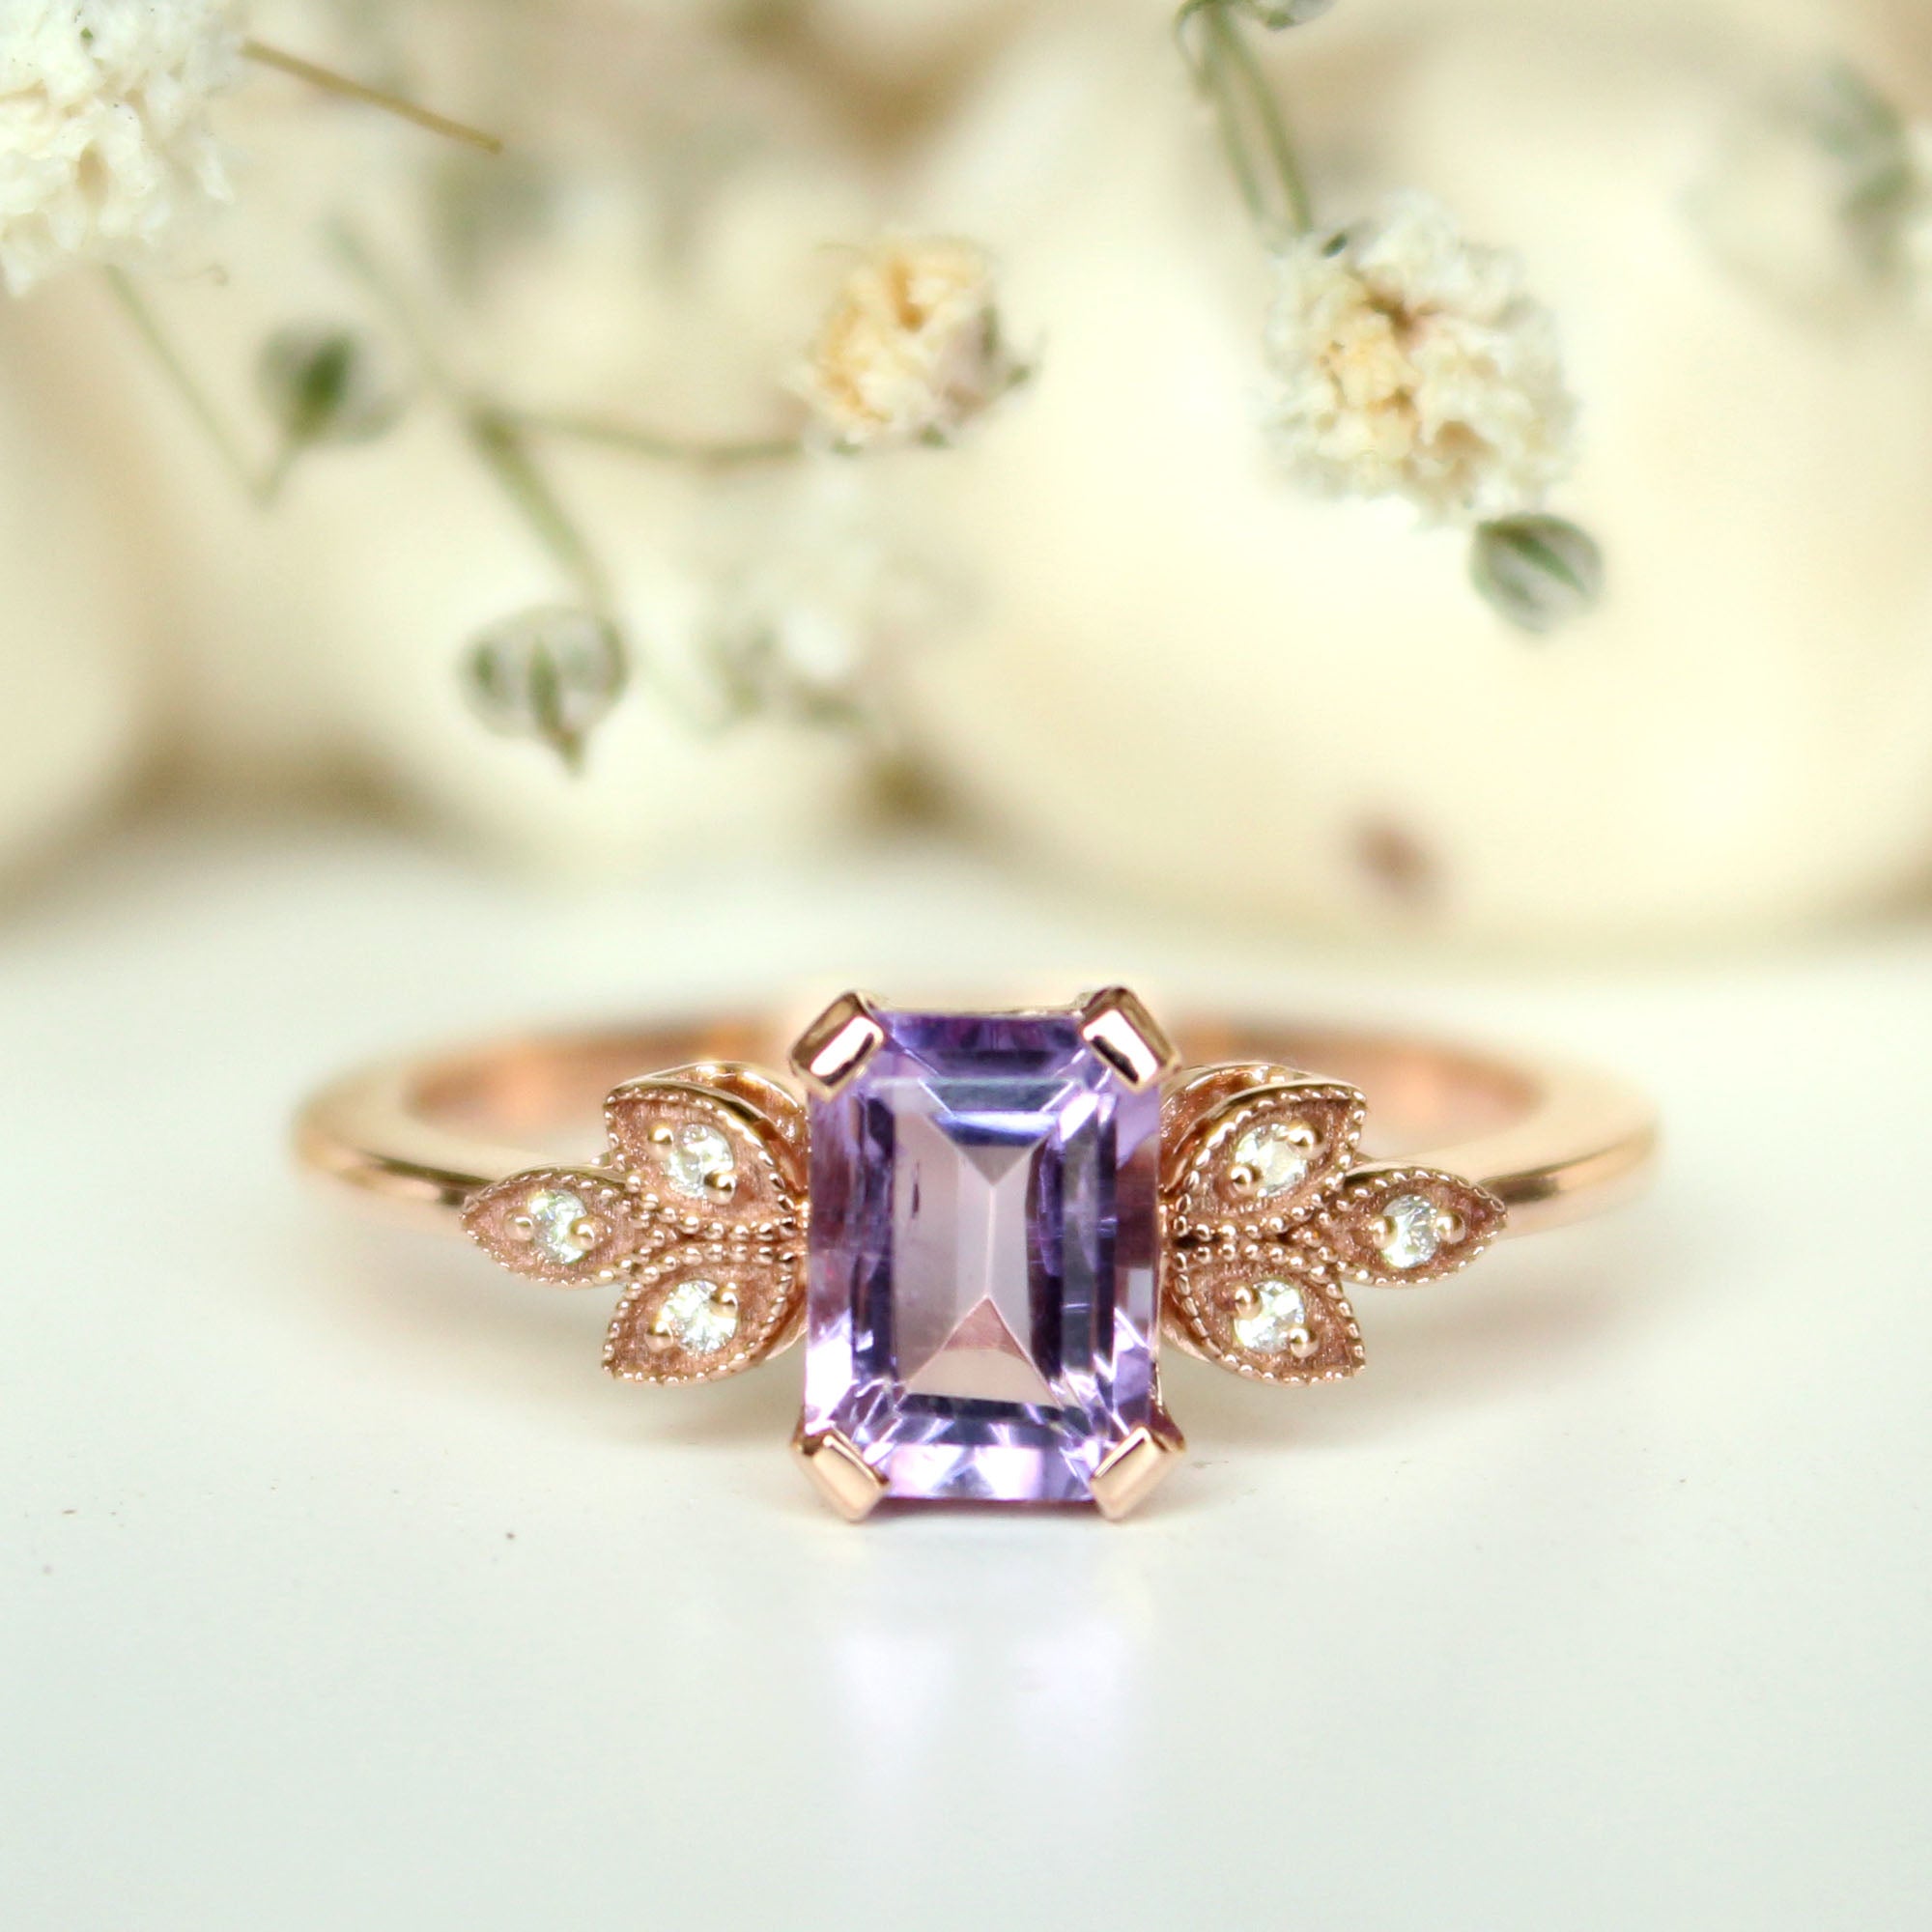 Emerald Cut Amethyst with Miligrain Leaves Diamond Engagement Ring